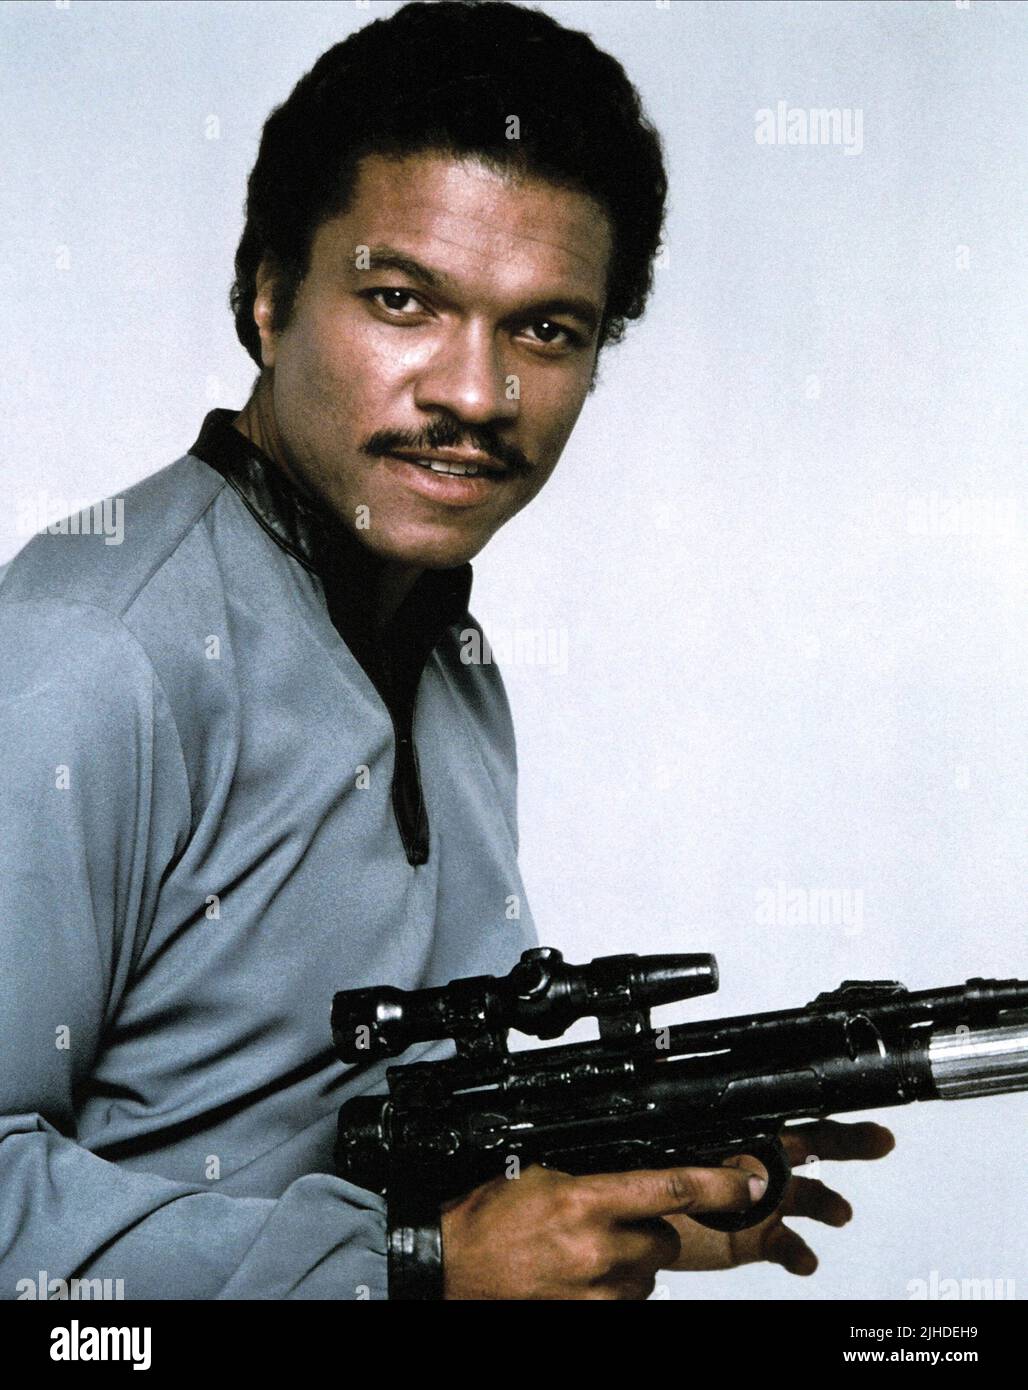 BILLY DEE WILLIAMS COMME CALRISION, Star Wars : Episode V - L'Empire contre-attaque, 1980 Banque D'Images